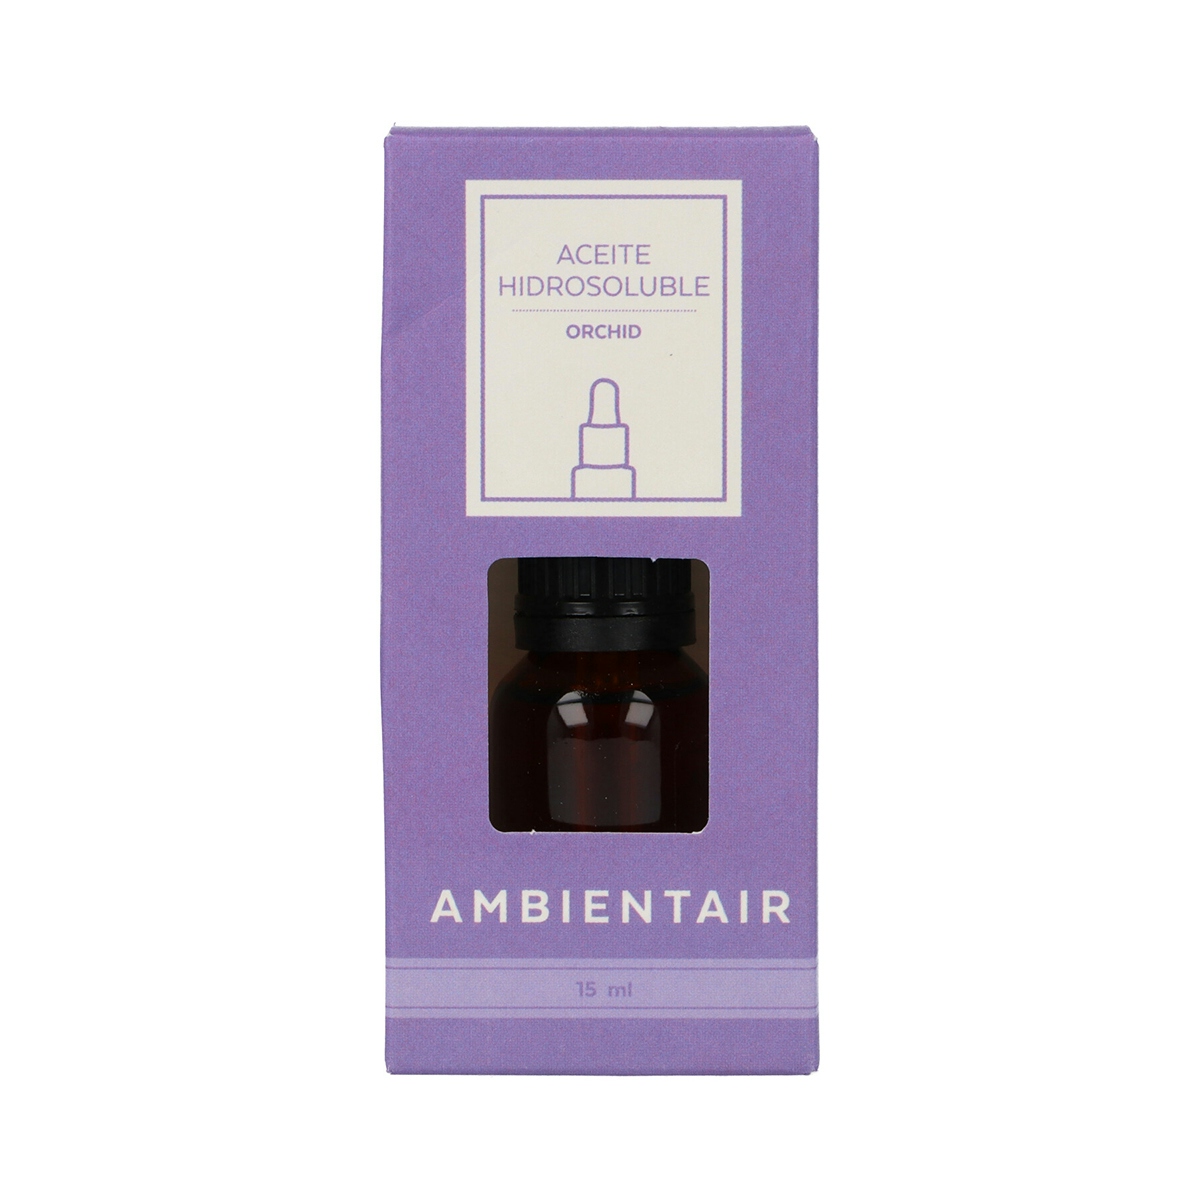 Aceite esencial LACROSSE orchid bote 15 ml